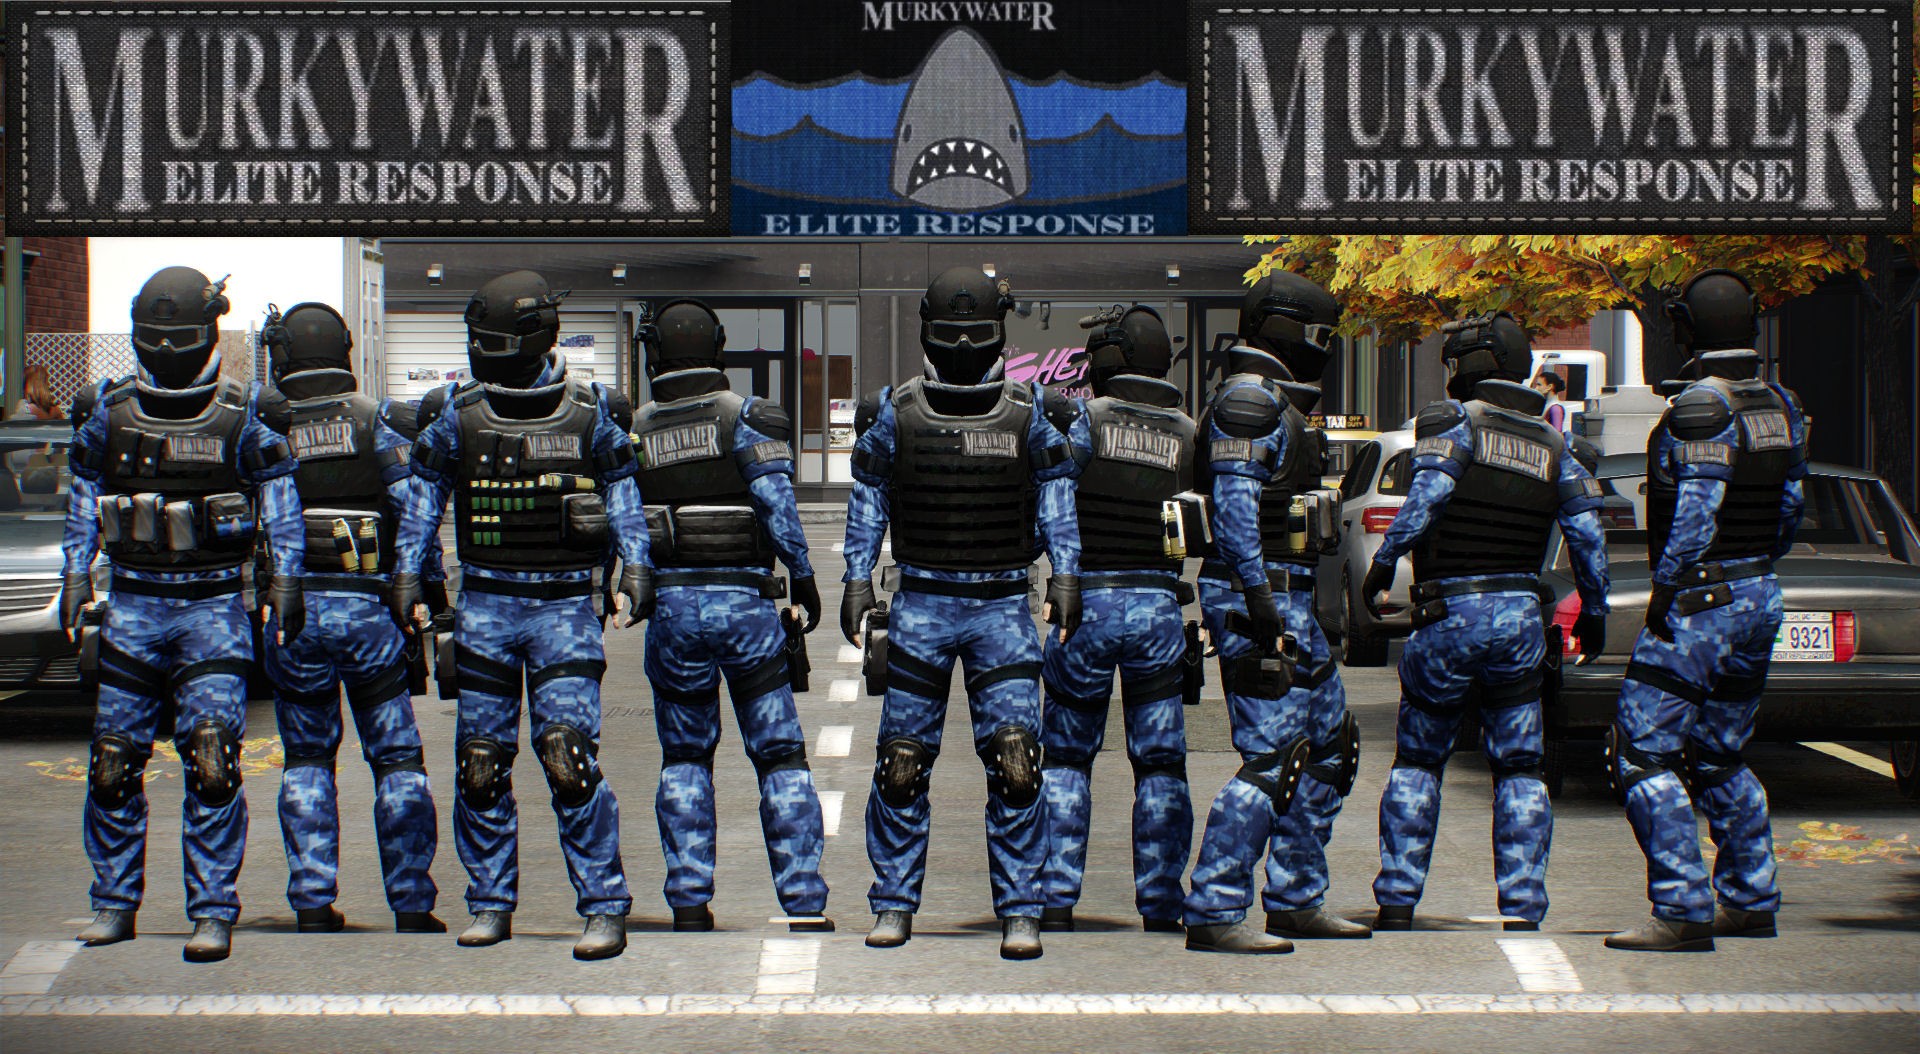 Payday 2 murkywater station фото 8